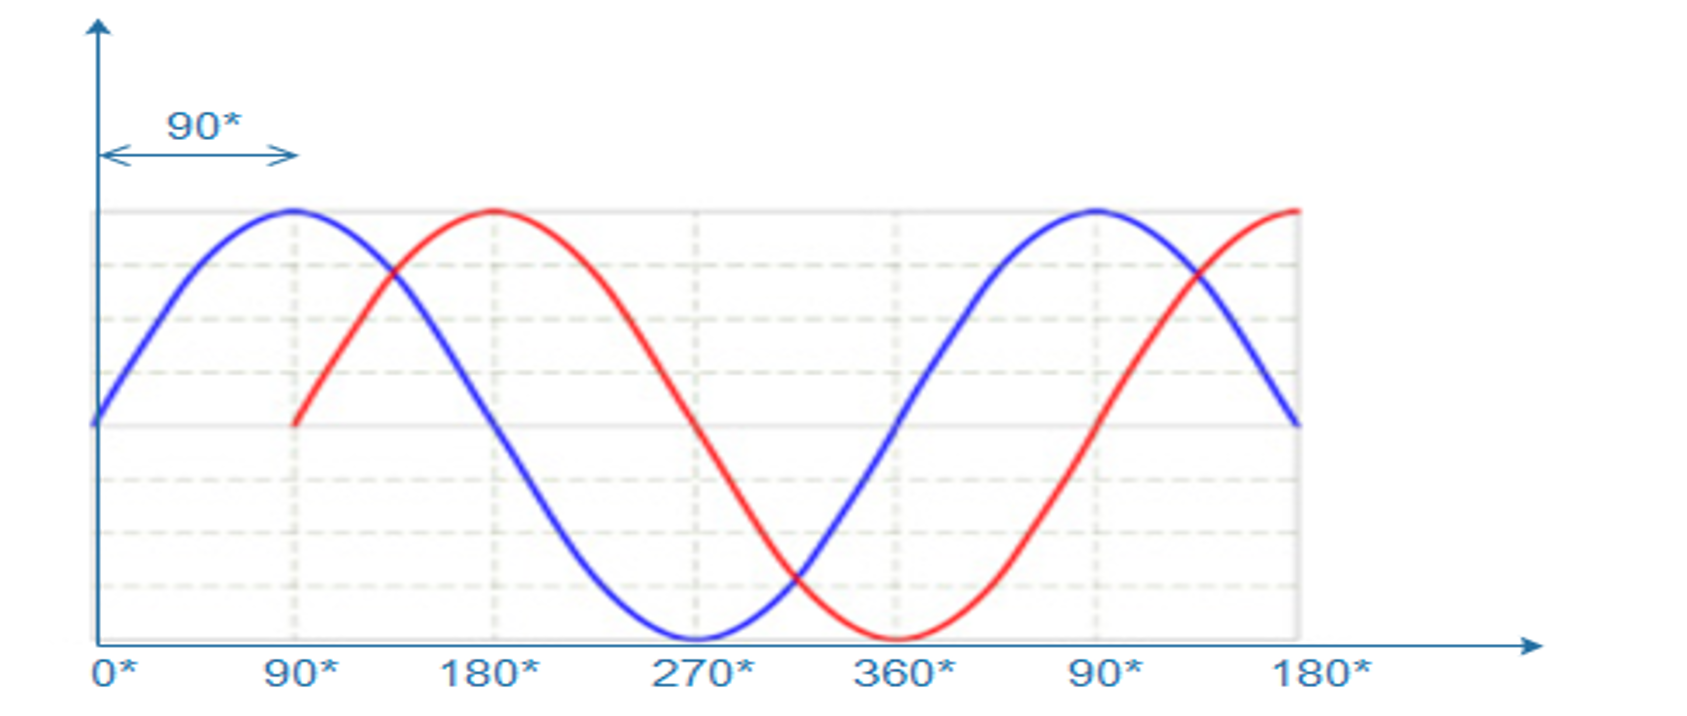 The image above shows the variation in the signal strength level as it travels through transmitter, over the air and at the receiver